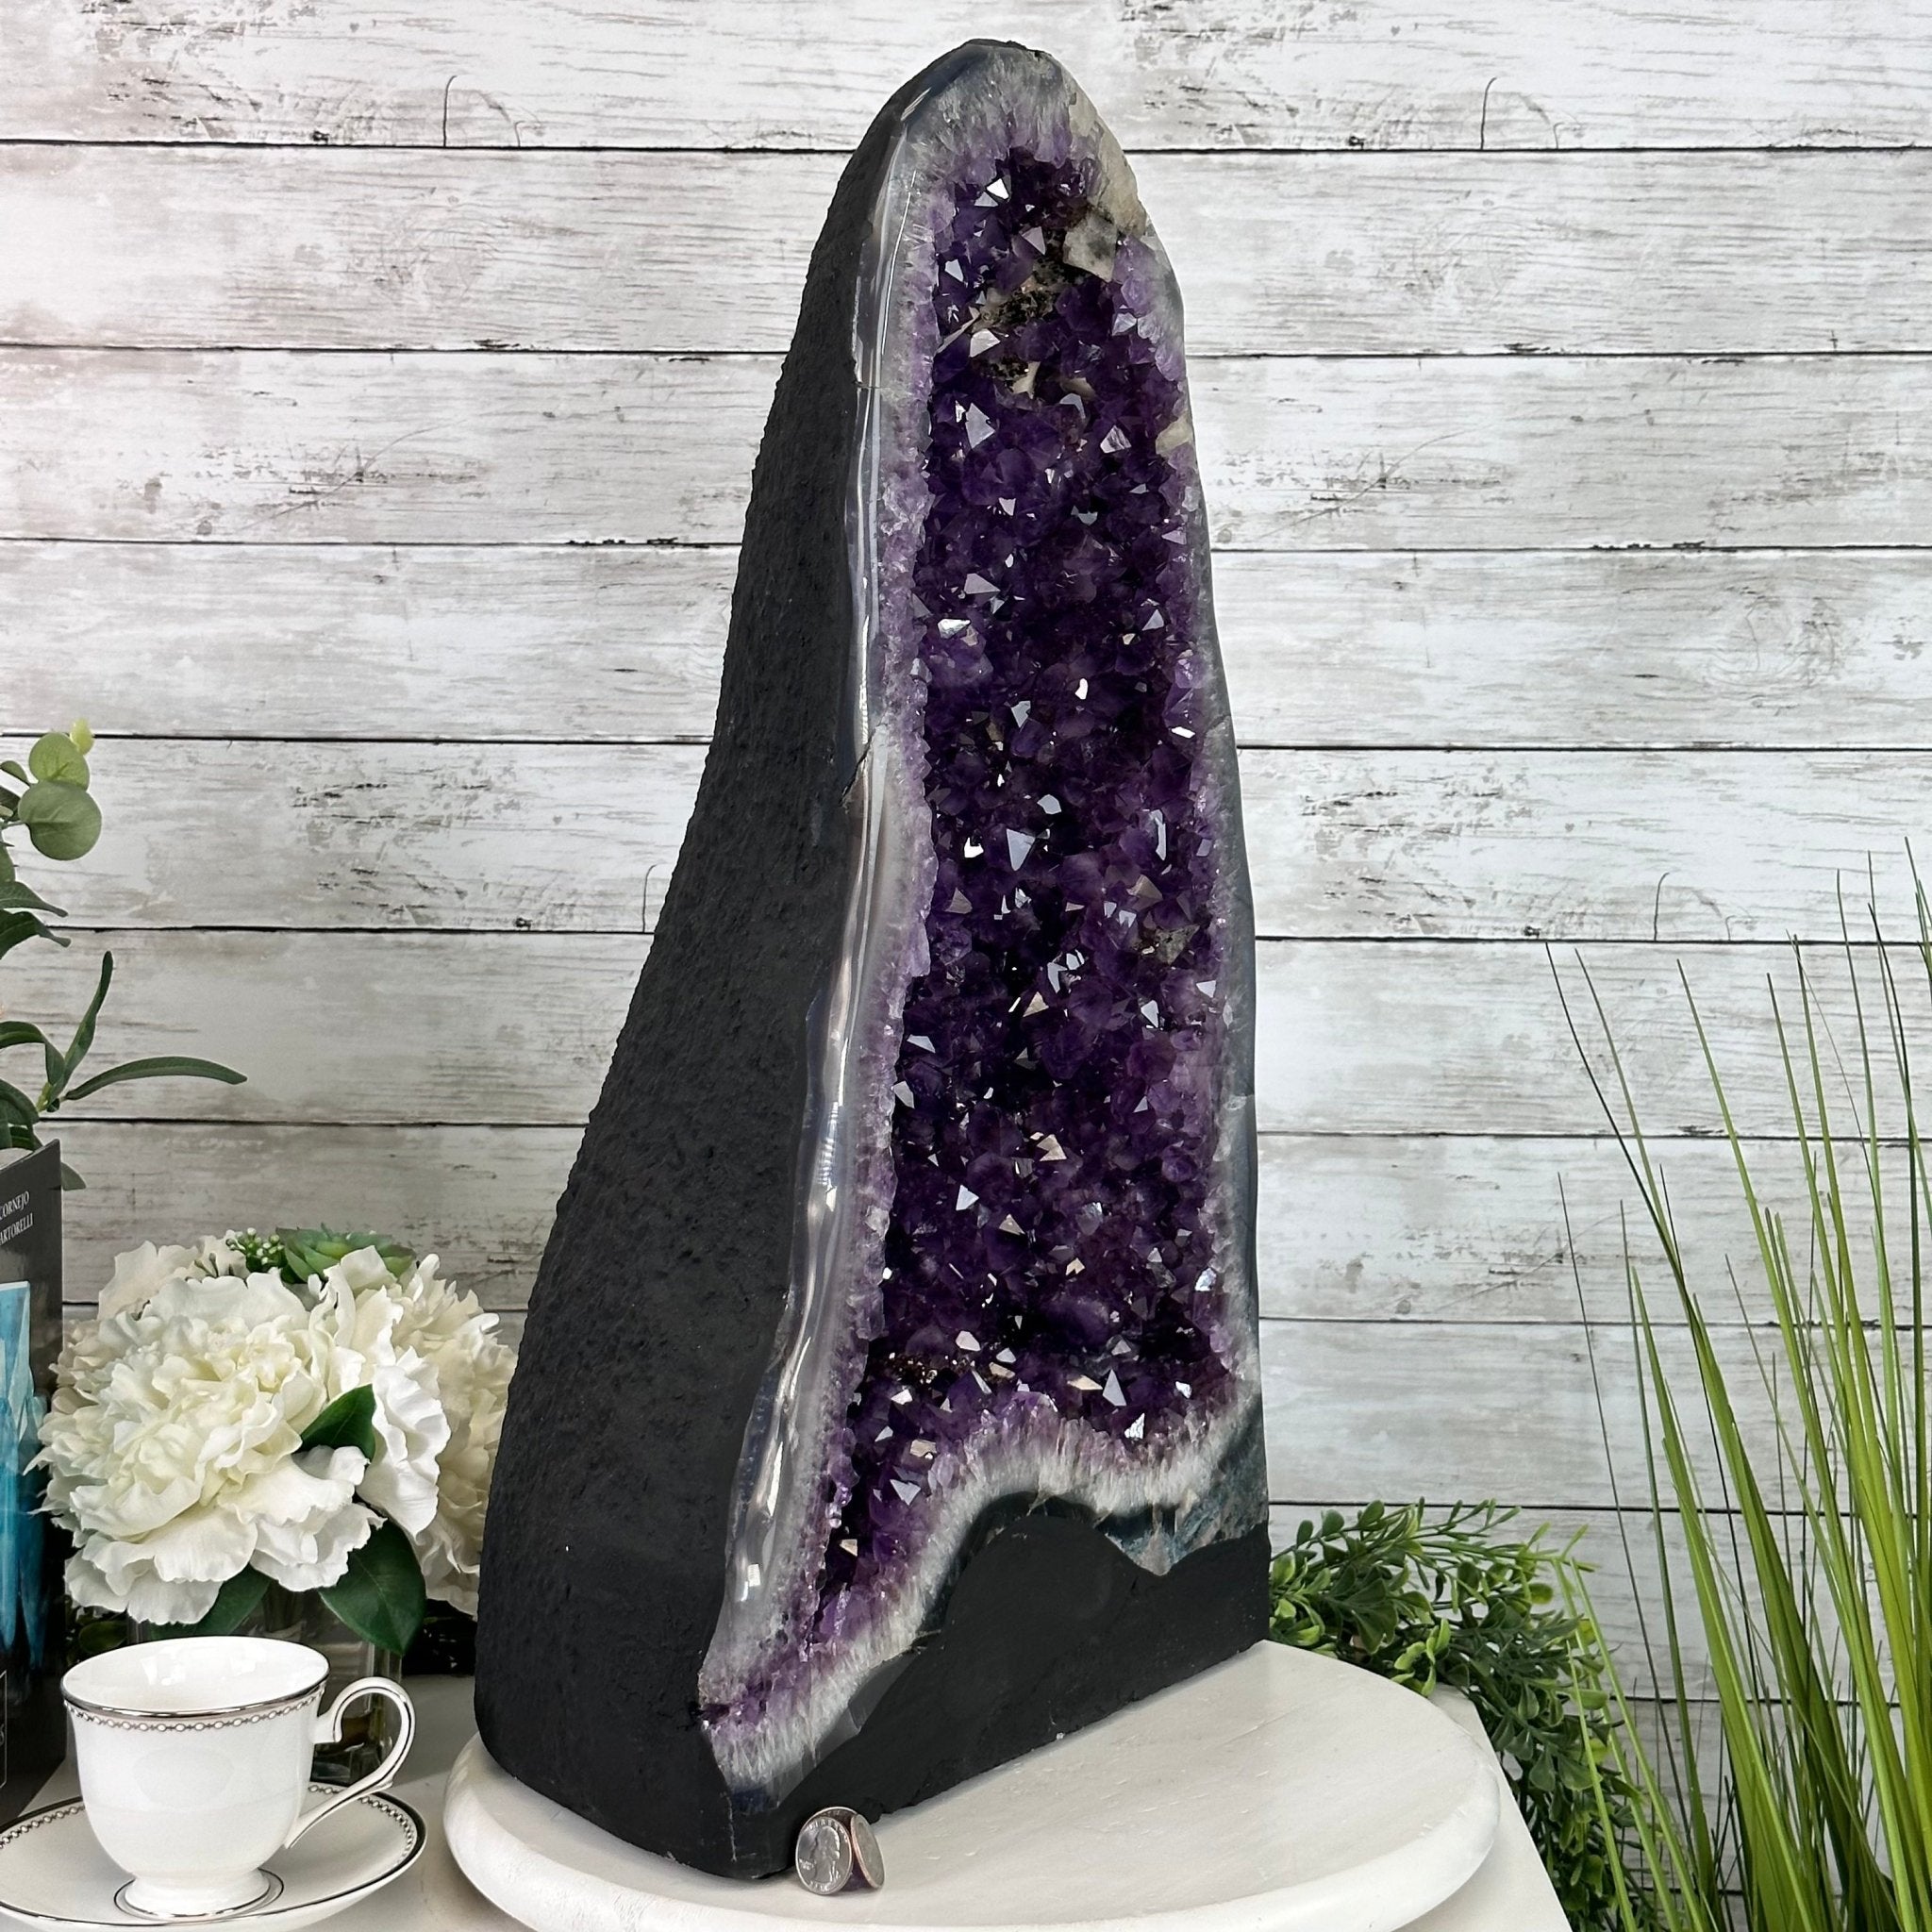 Extra Plus Quality Brazilian Amethyst Cathedral, 77.2 lbs & 24.2" Tall, Model #5601-0992 by Brazil Gems - Brazil GemsBrazil GemsExtra Plus Quality Brazilian Amethyst Cathedral, 77.2 lbs & 24.2" Tall, Model #5601-0992 by Brazil GemsCathedrals5601-0992